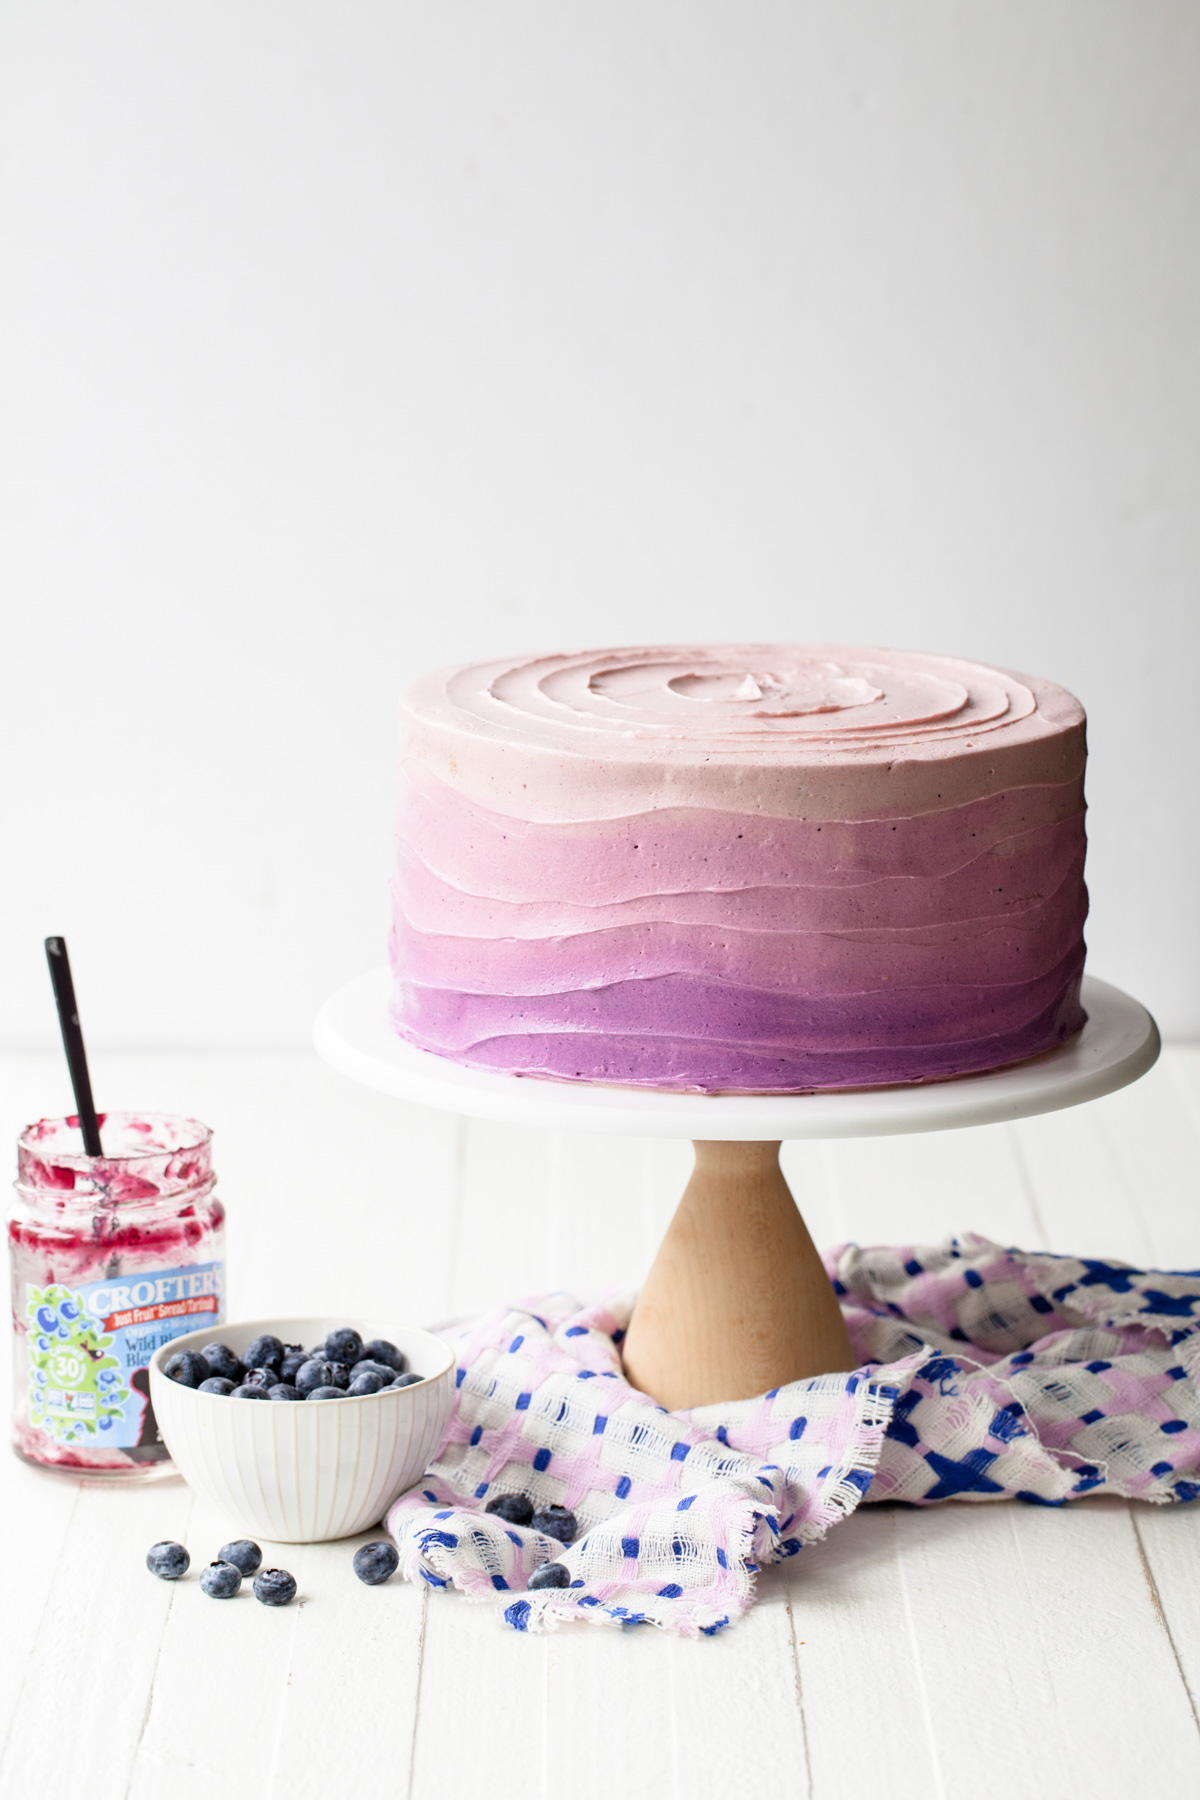 A blueberry layer cake with purple ombre icing on a cake stand